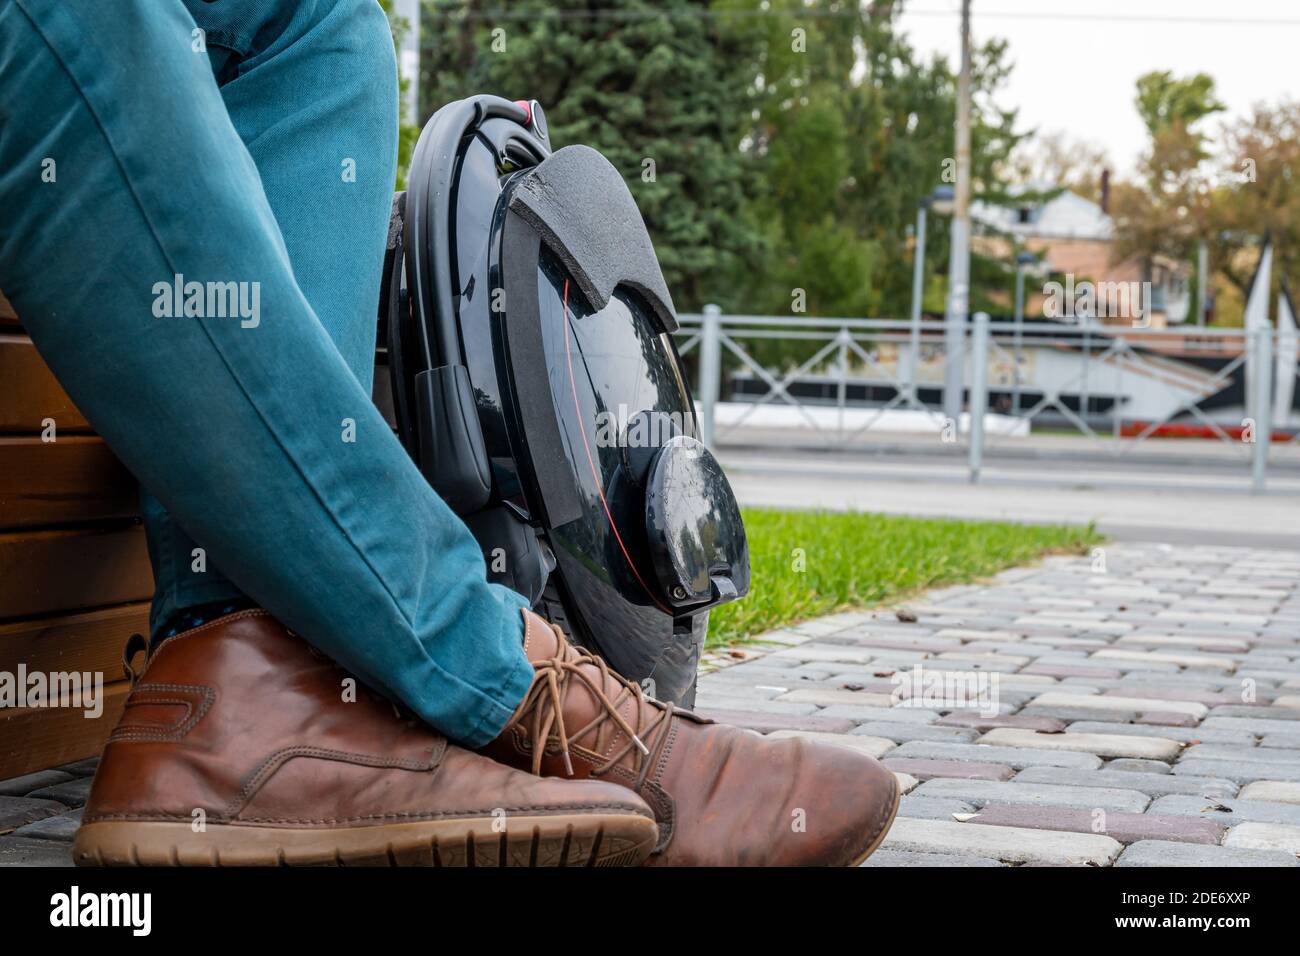 Electric mono wheel, innovative personal vehicle, self-balancing electric unicycle, ecological urban transport of the future near a man in jeans and b Stock Photo